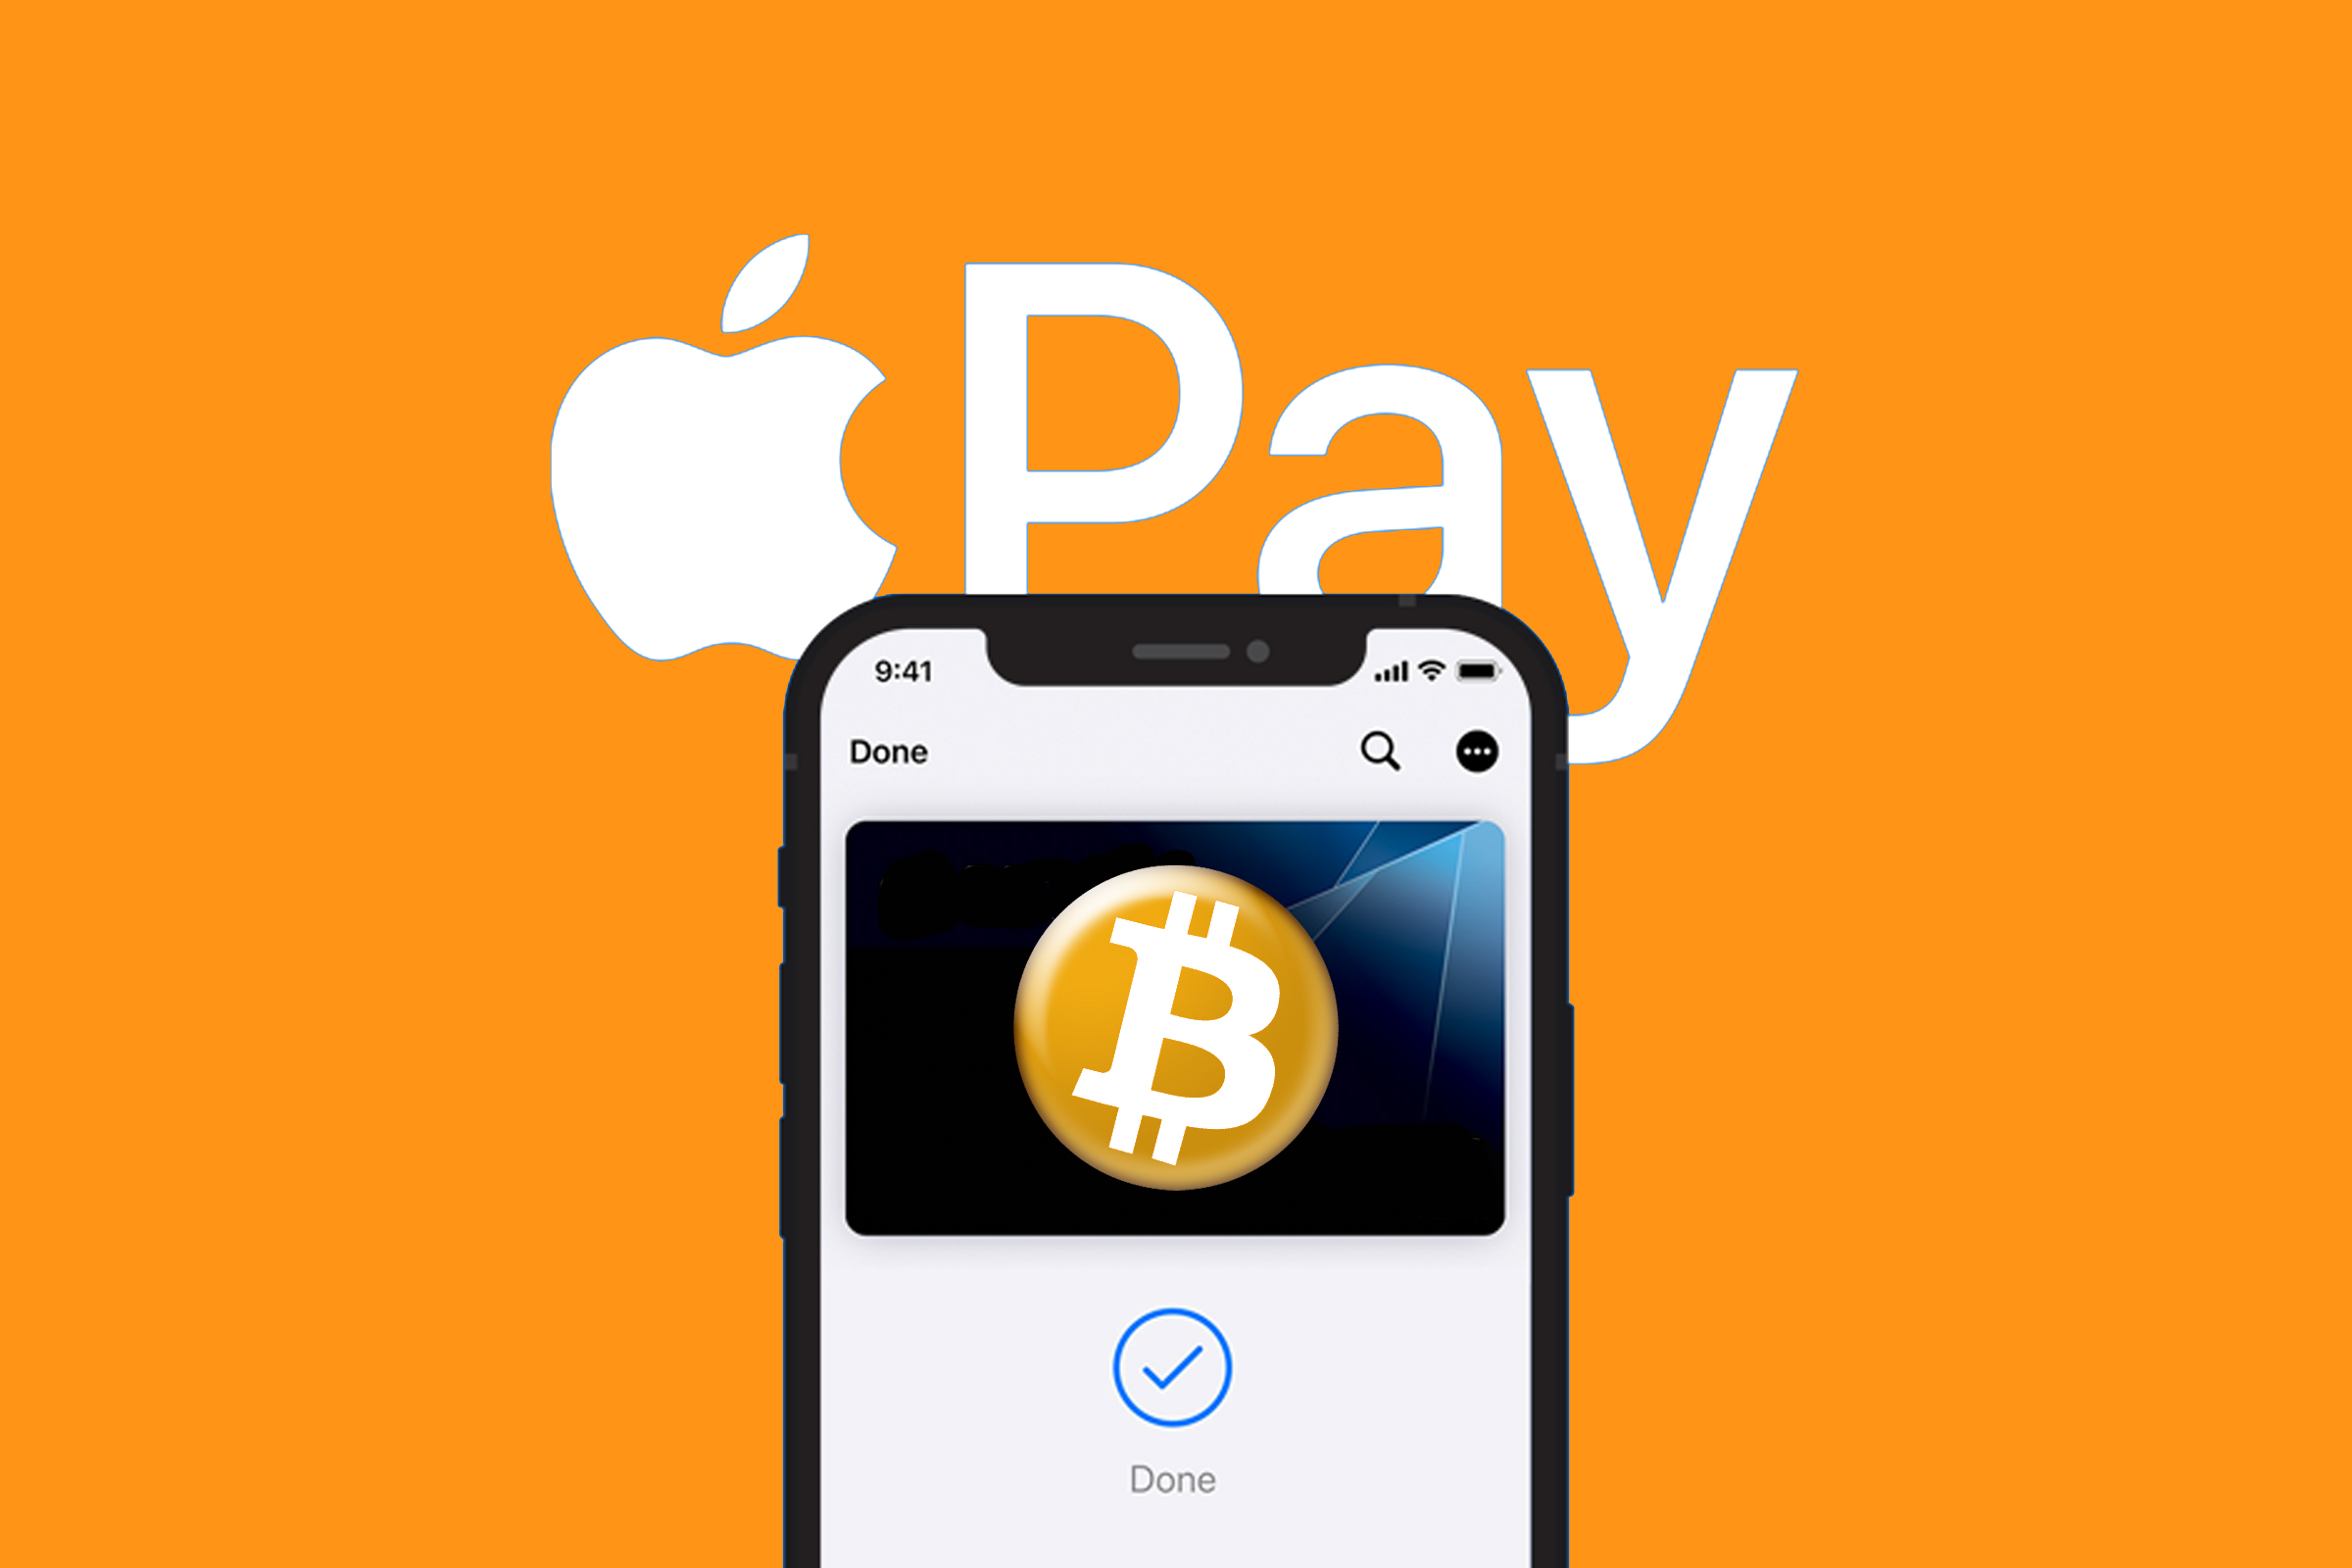 Apple is about to introduce a crypto payment feature on